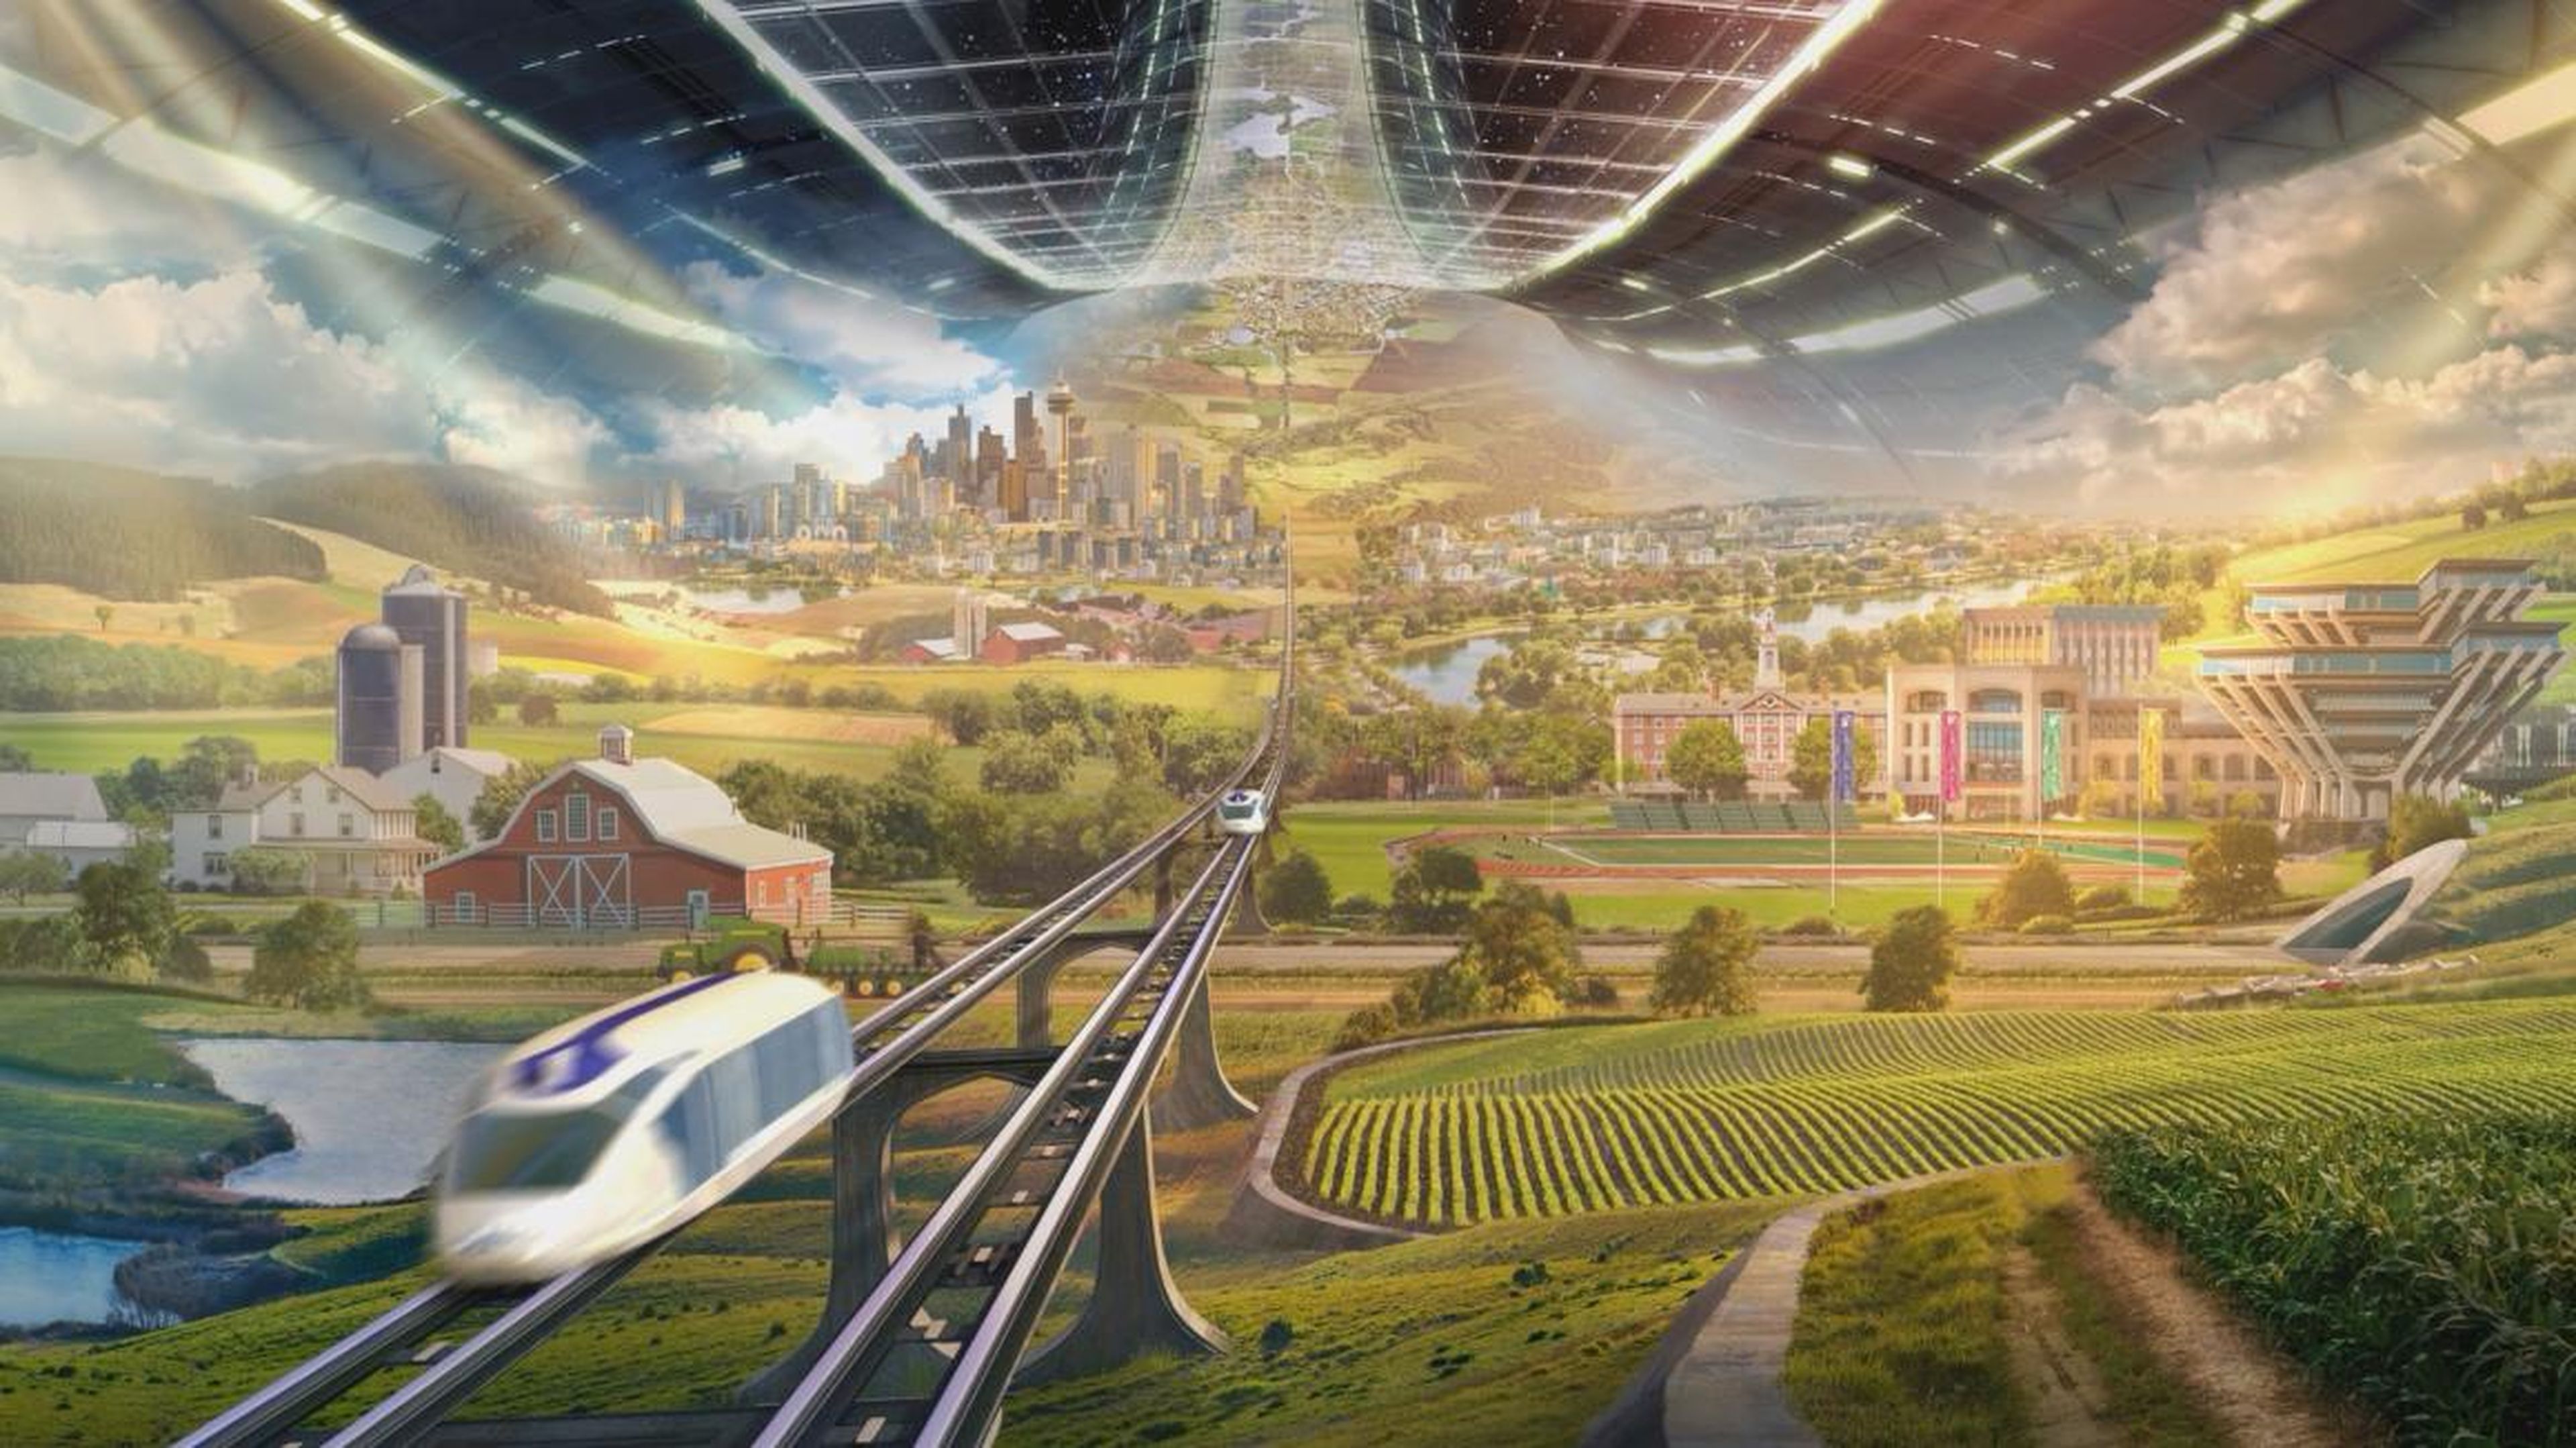 An artist's concept of an O'Neill space colony, with agriculture and high-speed transport.